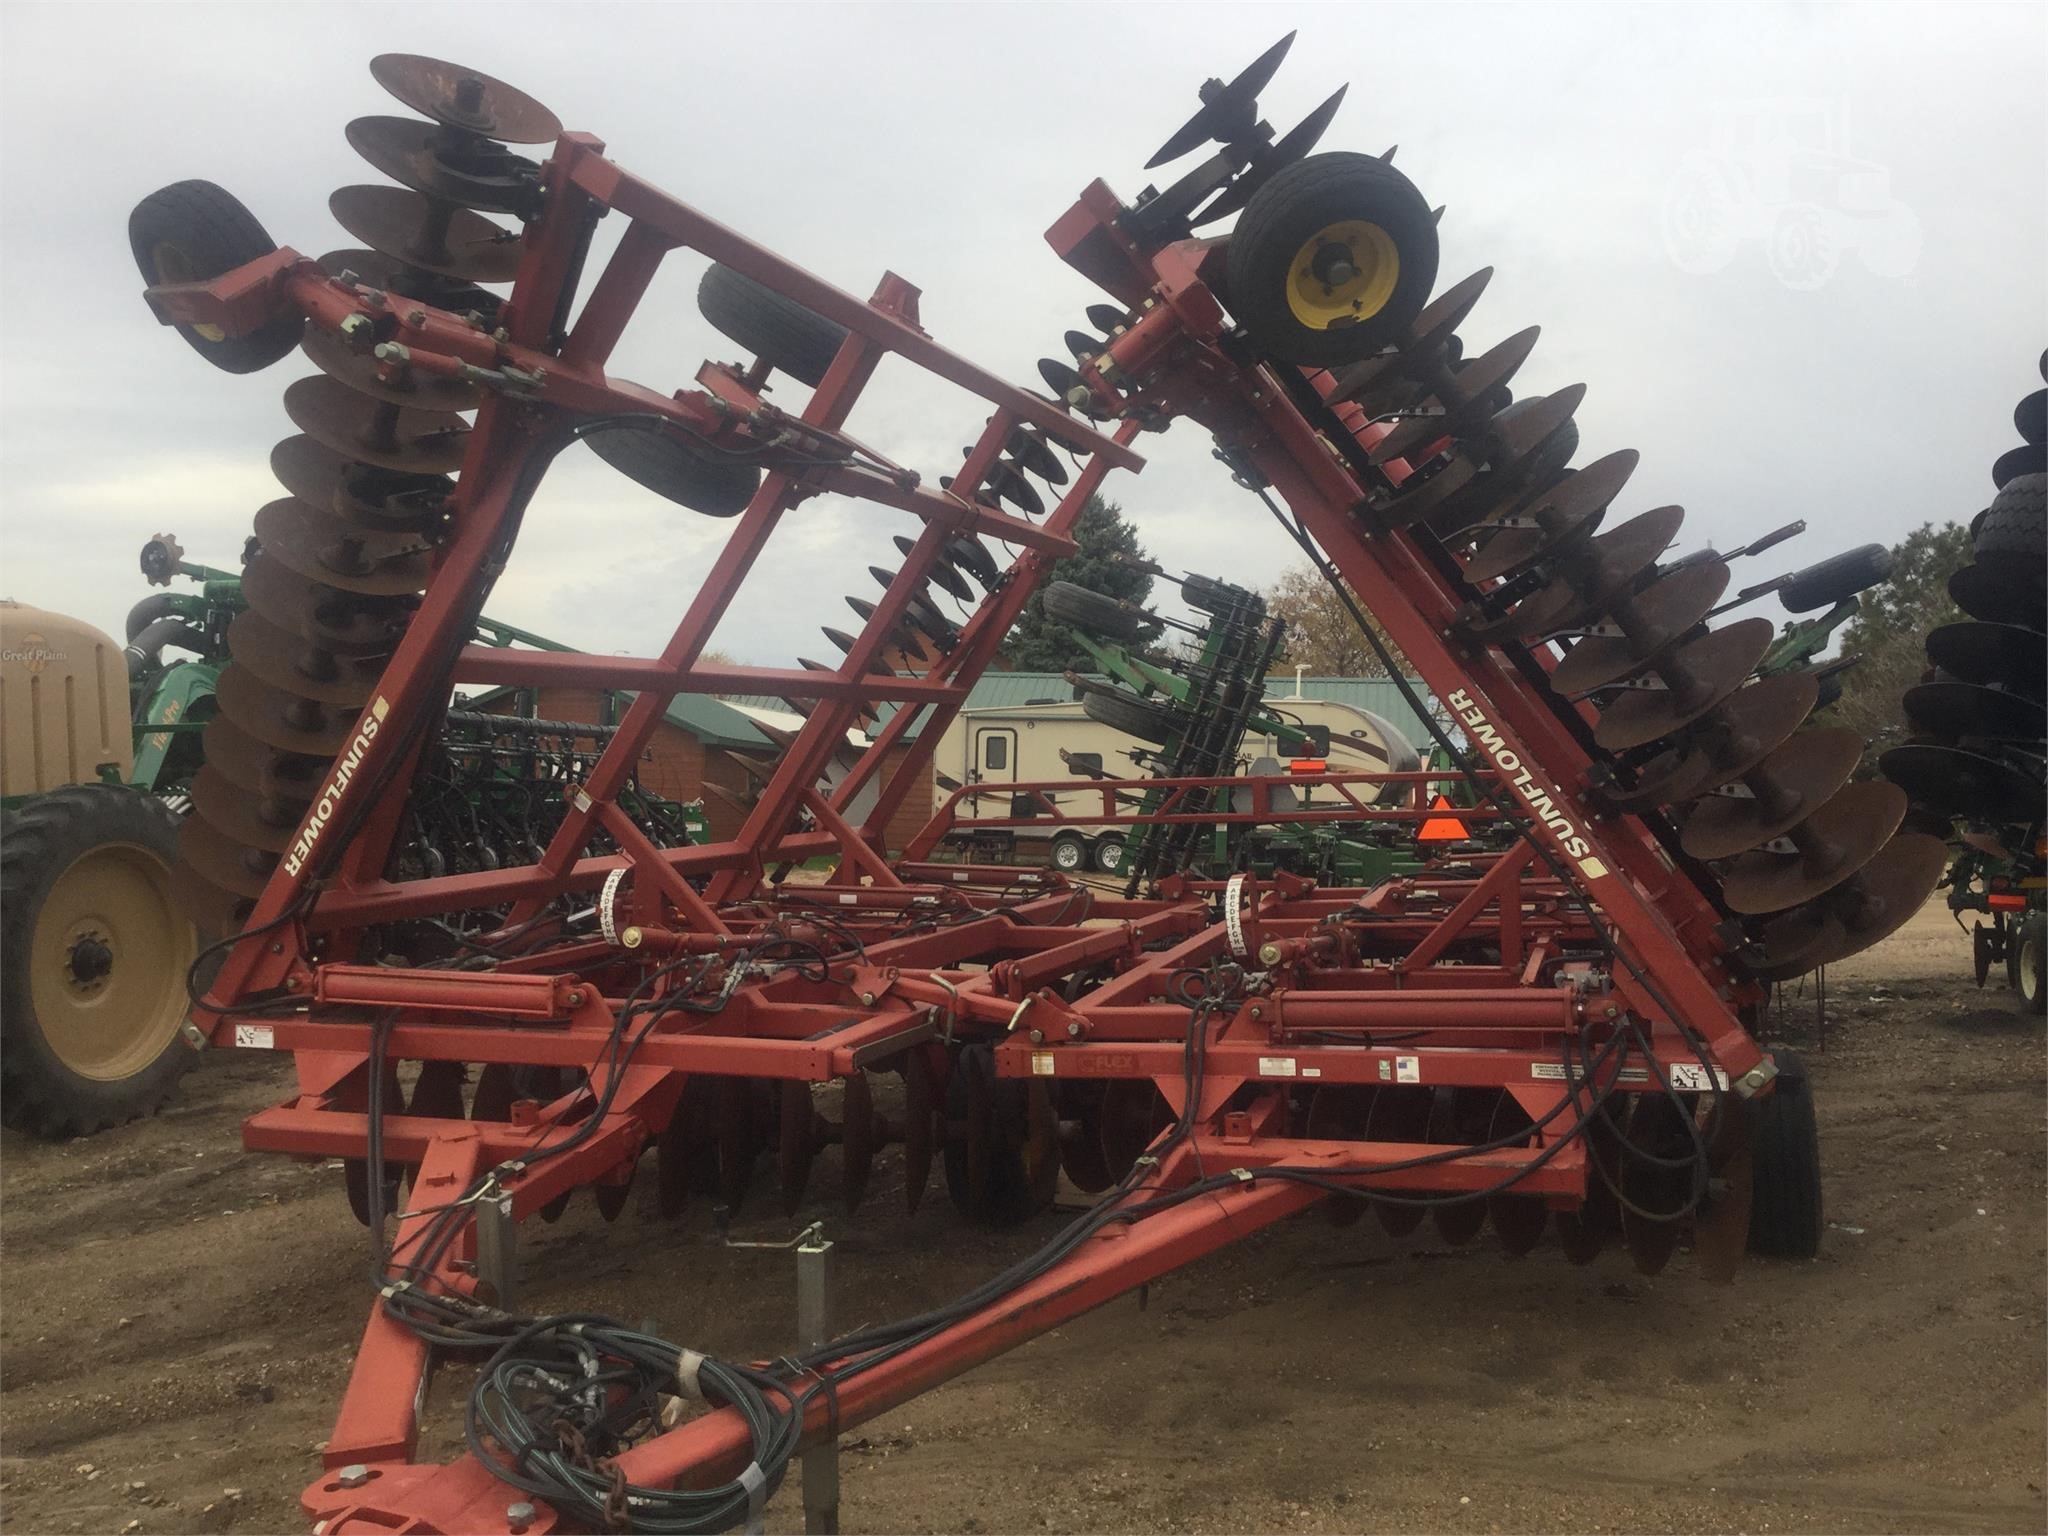 Used Farm Equipment For Sale By Northside Implement - 31 Listings 